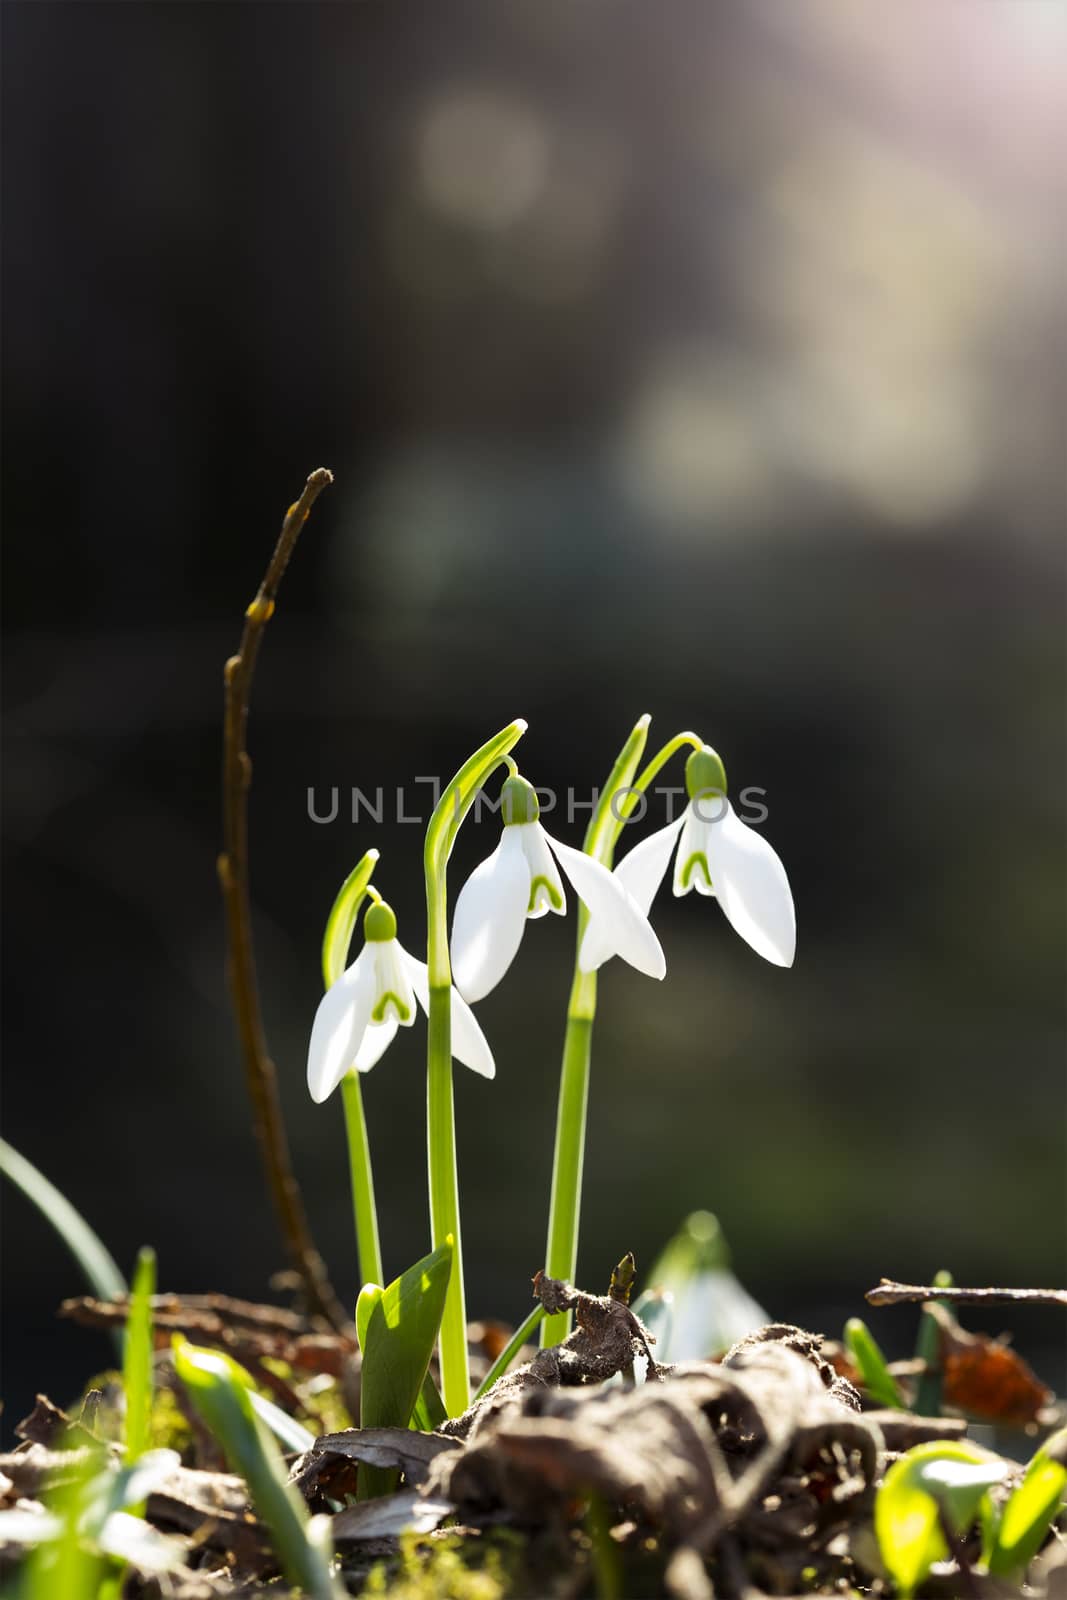 Snowdrops in a nature lit by sun.